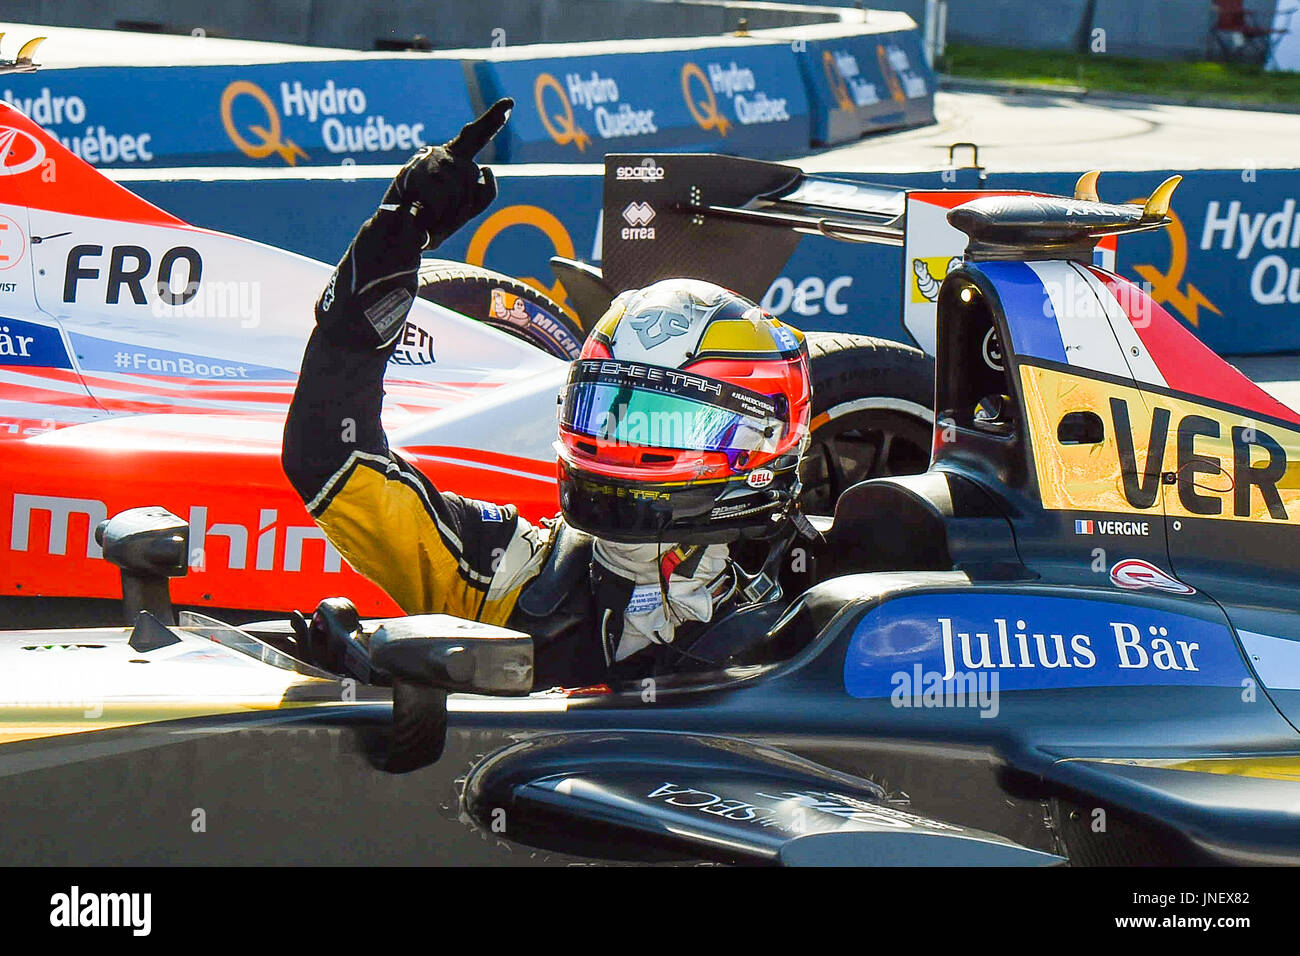 Montreal, Canada. 30th July, 2017. Winner of the race Techeetah pilot Jean-Eric Vergne (25) celebrates with his arm in the air during the Montreal Formula E ePrix in Montr © al, Qu © bec. David Kirouac/CSM Credit: Cal Sport Media/Alamy Live News Stock Photo